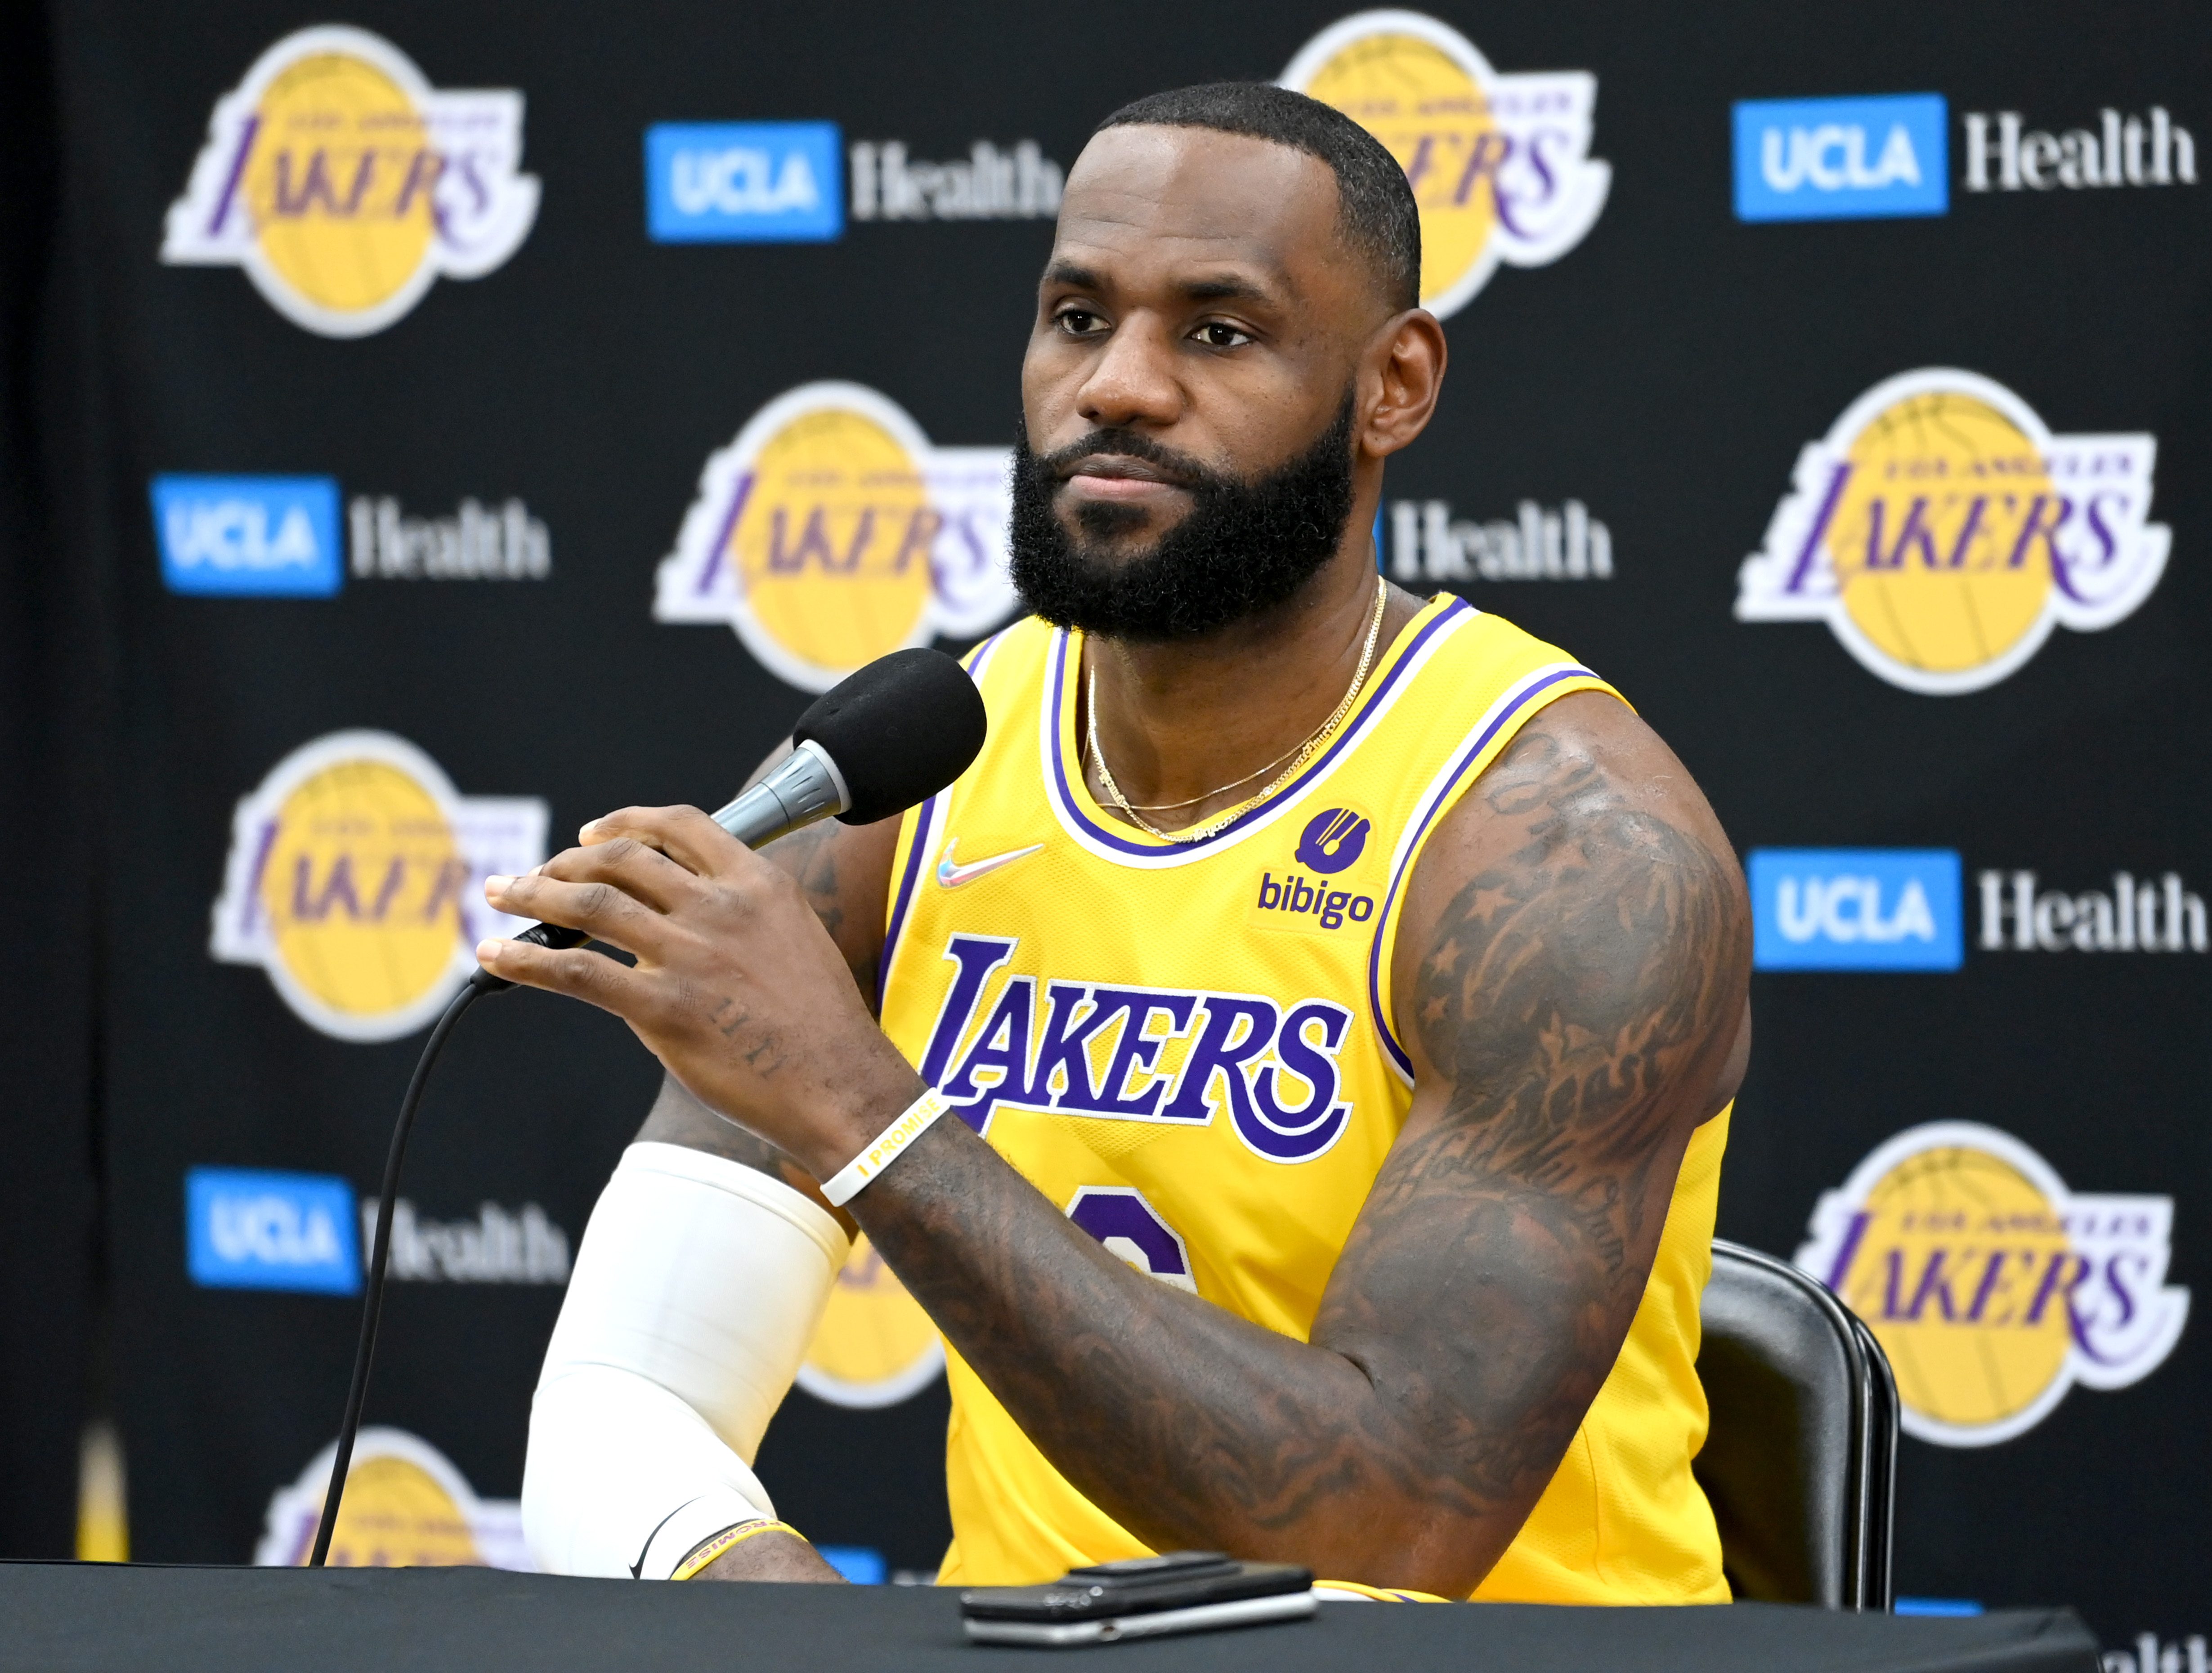 LeBron James: ‘Not my job’ to advocate for vaccine